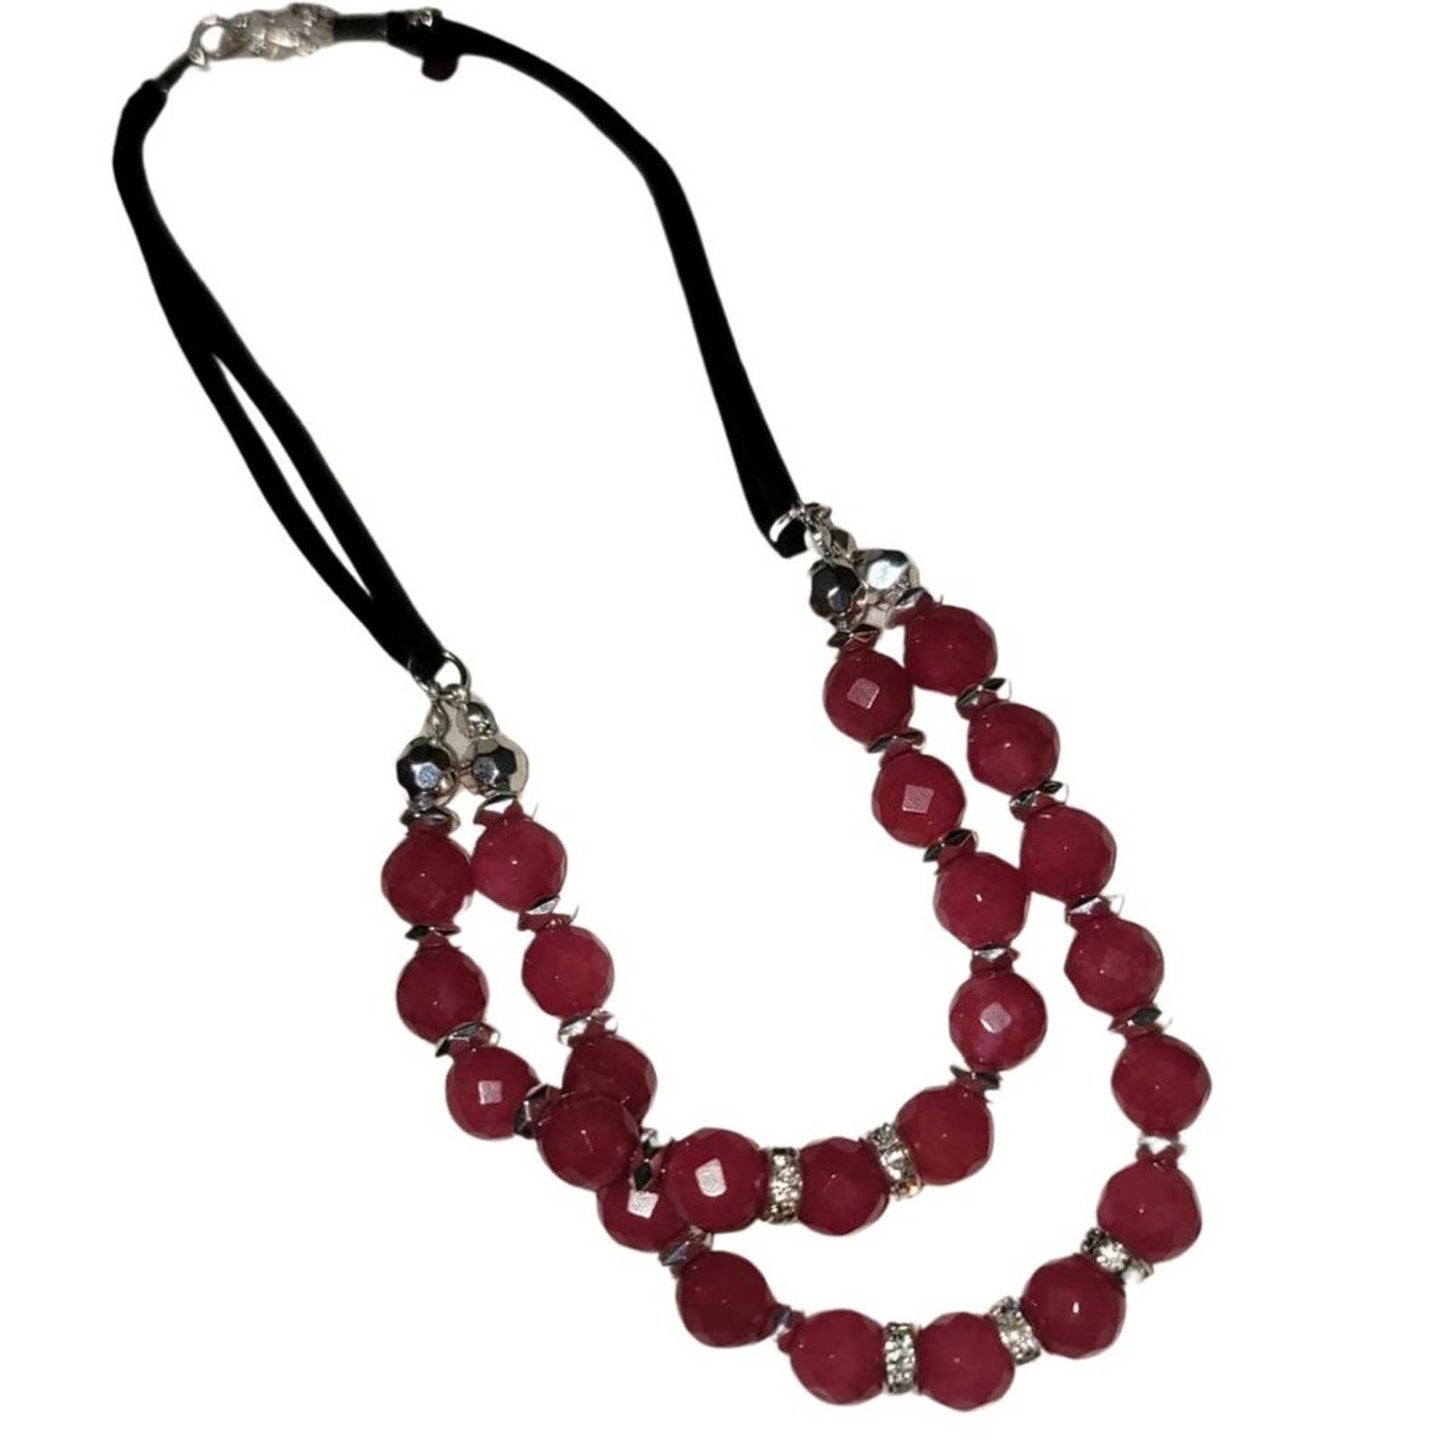 WHBM White House Black Market Double Strand Red Jade Necklace NWT